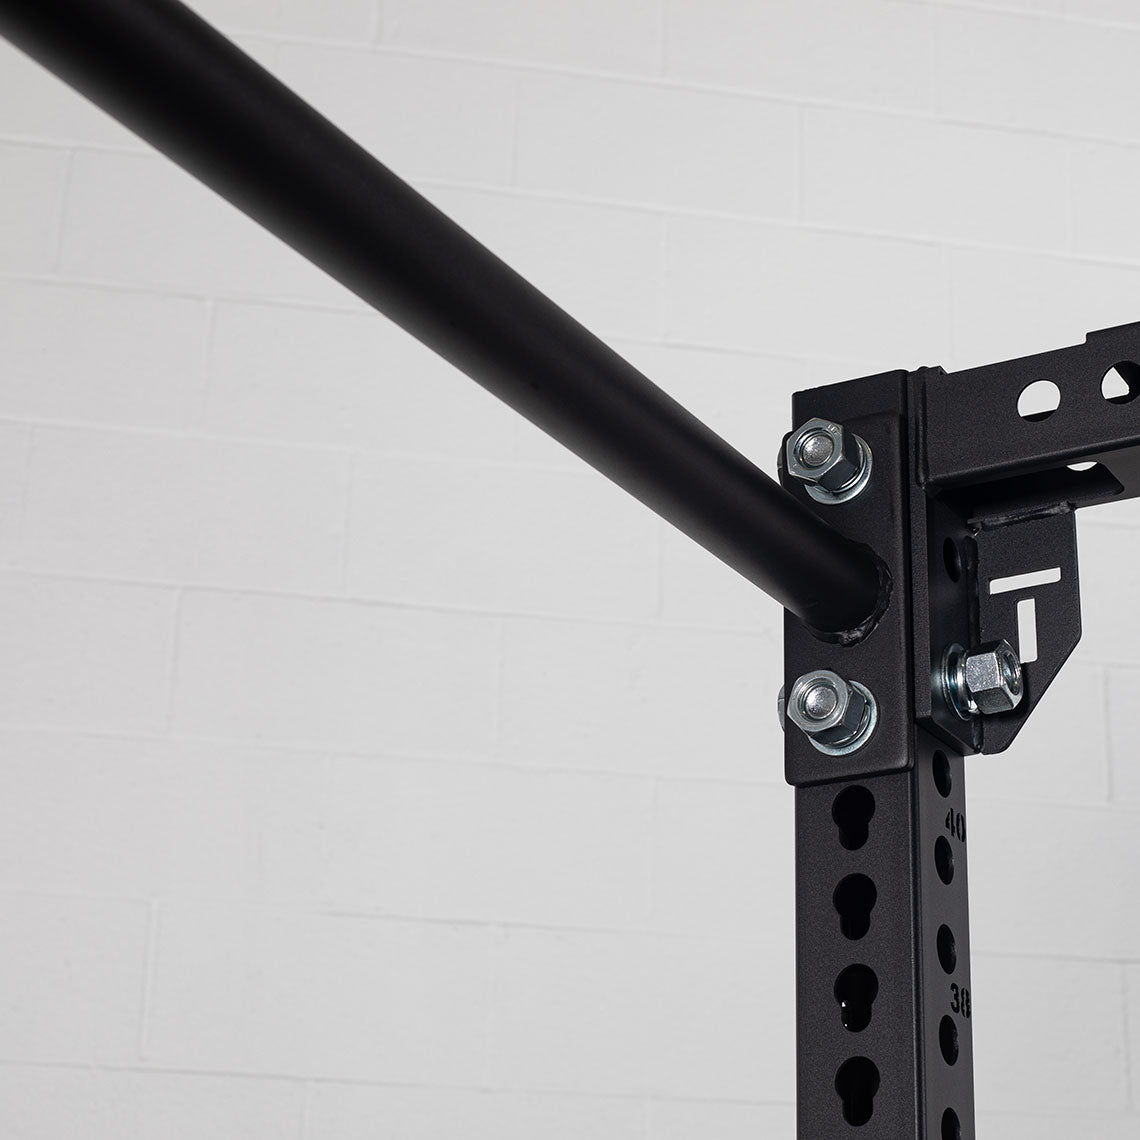 TITAN Series 2" Single Fat Pull-Up Bar - 1-inch Hardware for maximum stability and durability - view 3